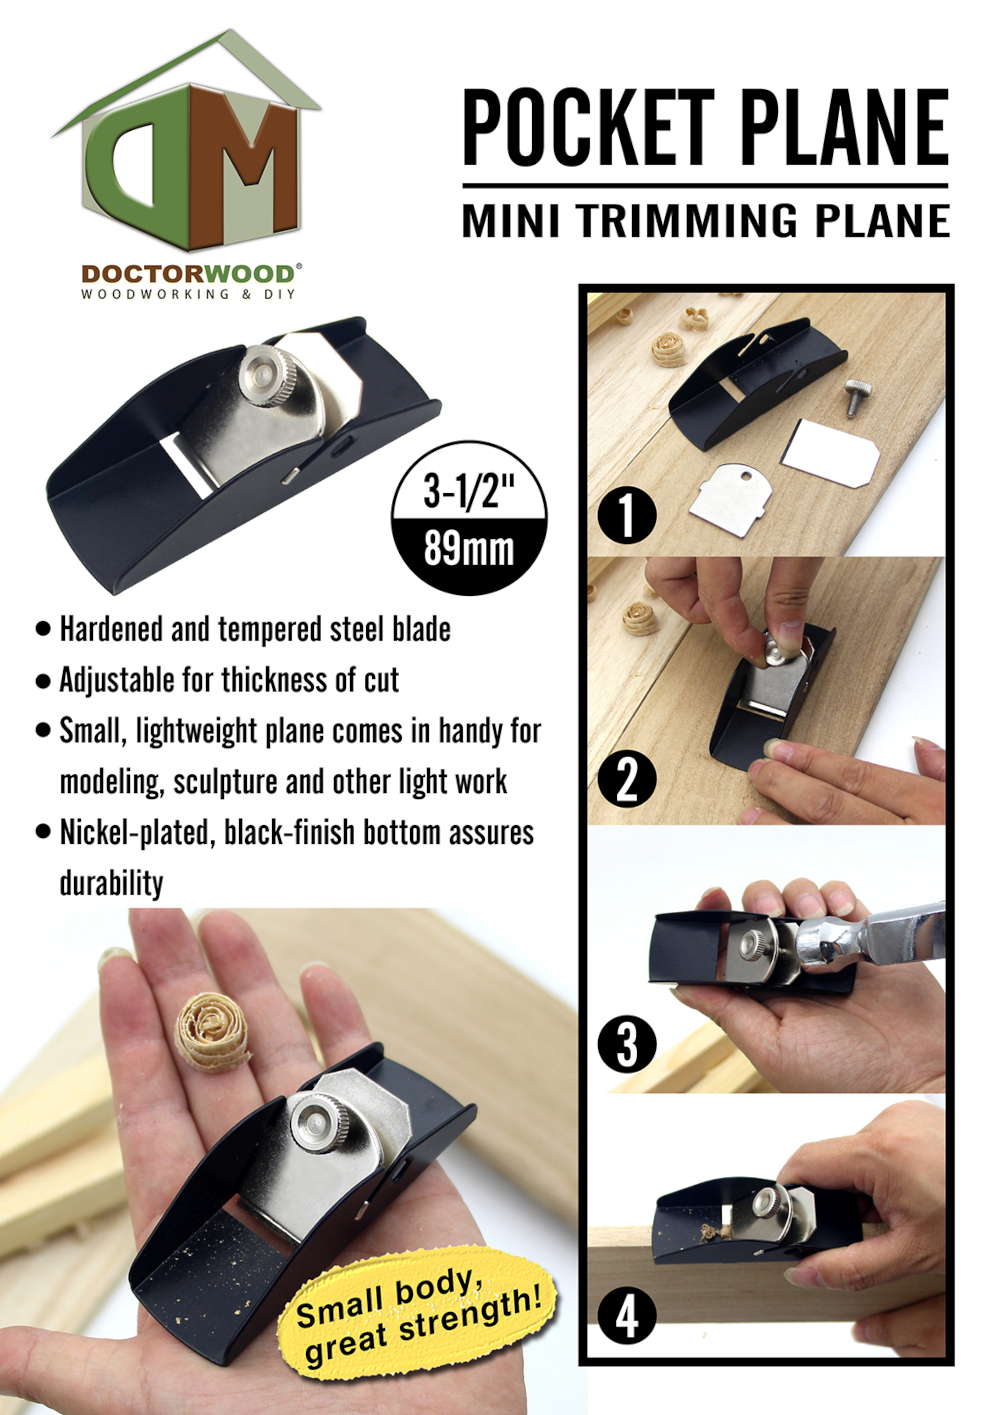 Mini Hand Plane Compact Steel Body Woodworking Tool Adjustable Depth & Portable Pocket Size Design for Trimming Wood Planing & Fine Finishing